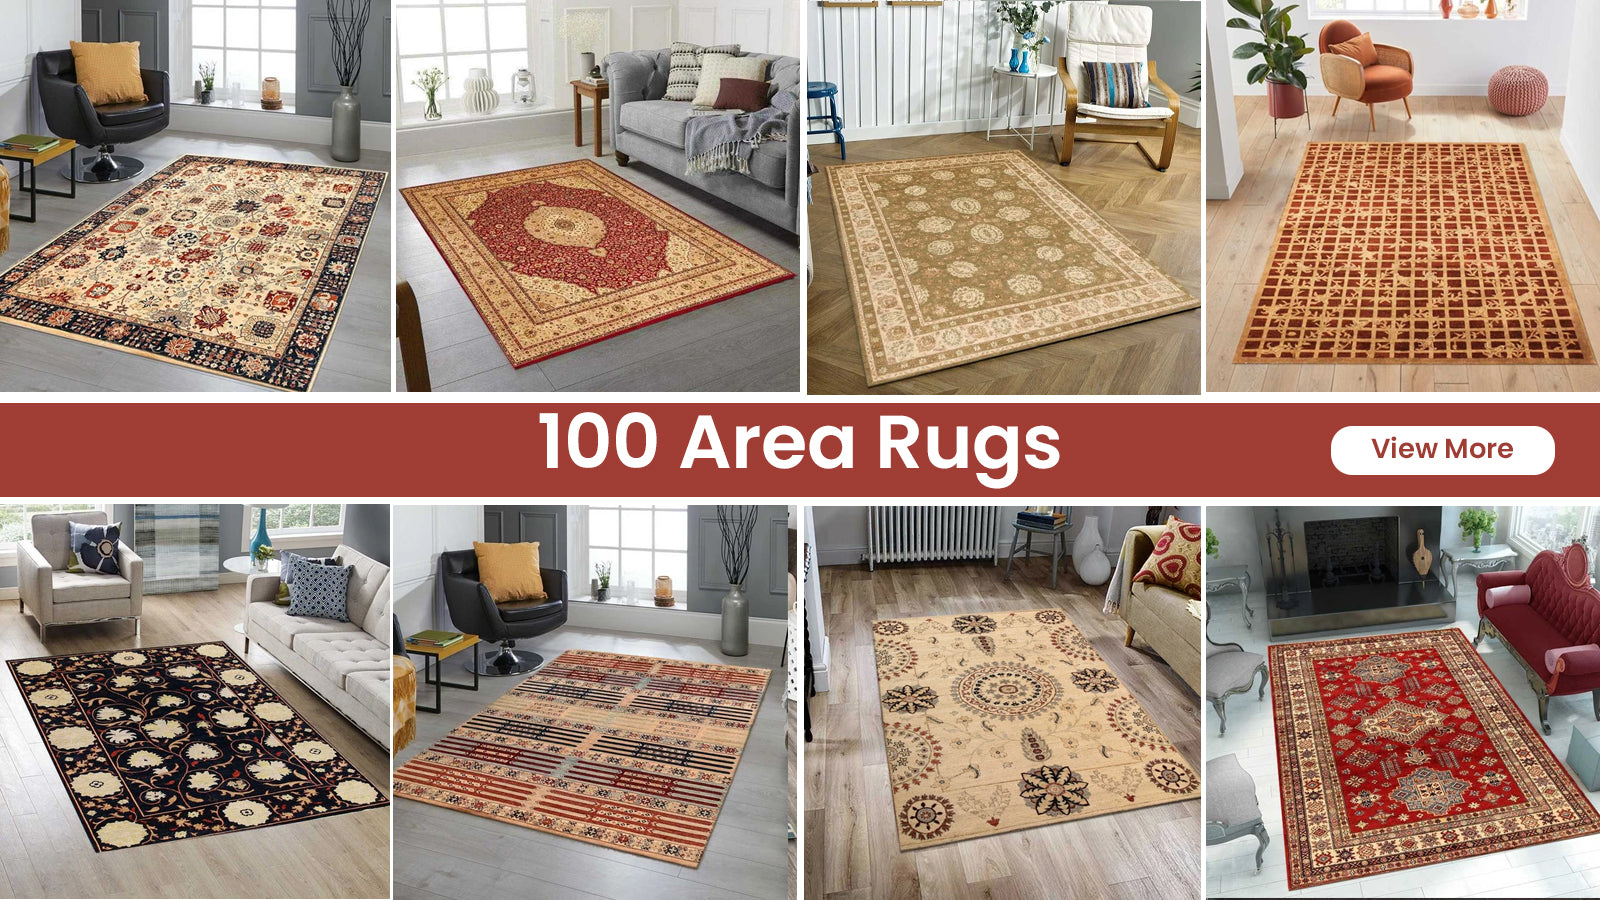 Read This Rug Sizes Guide Before Buying a New Rug - RugKnots